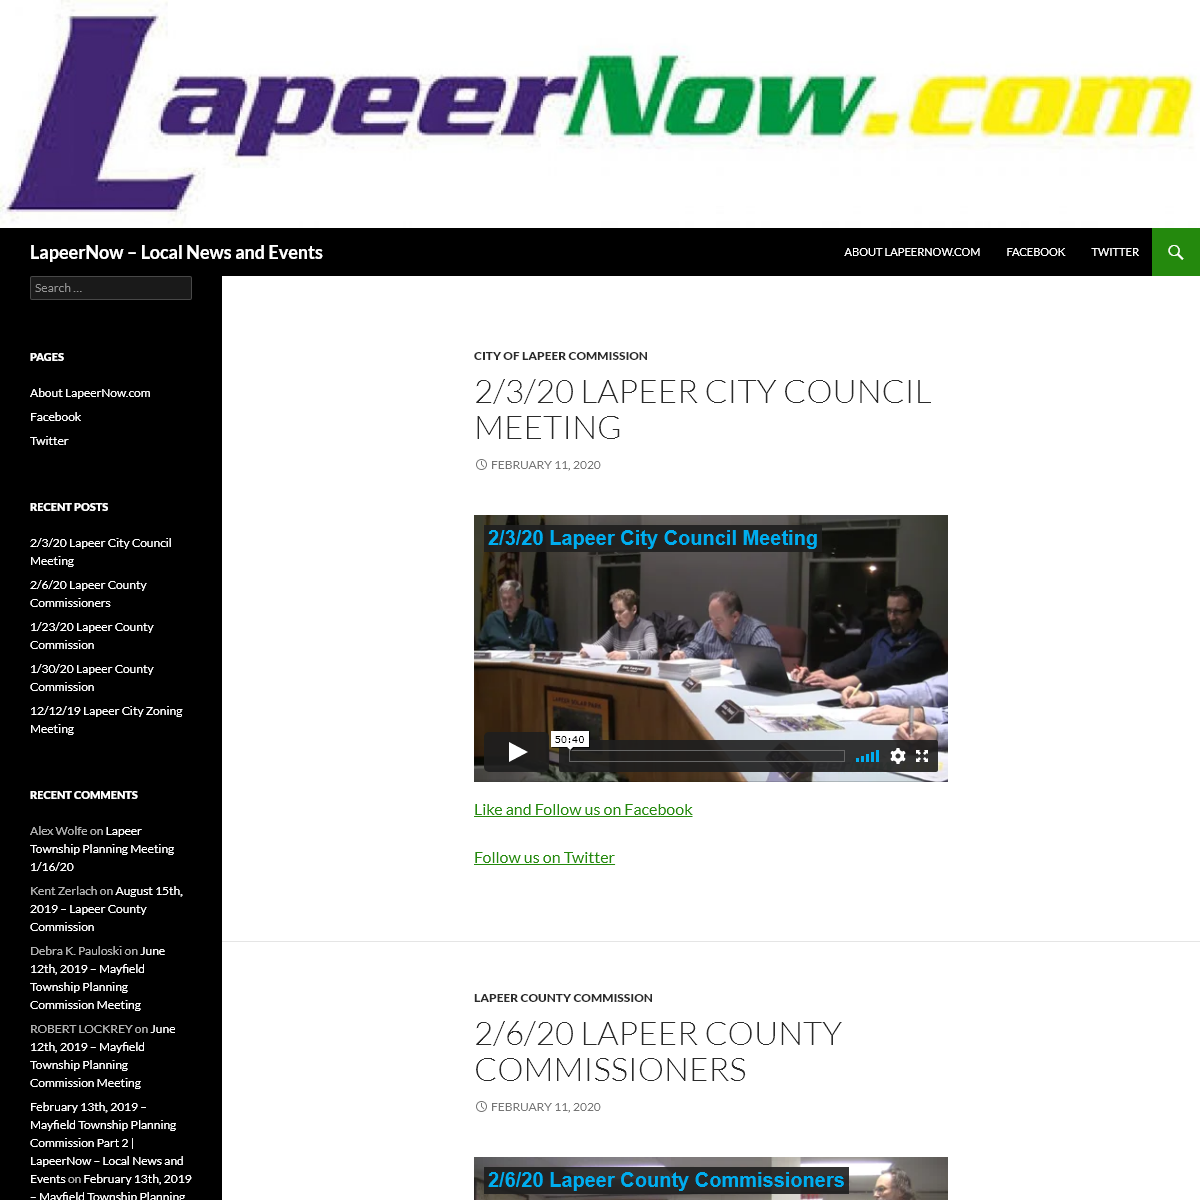 A complete backup of lapeernow.com